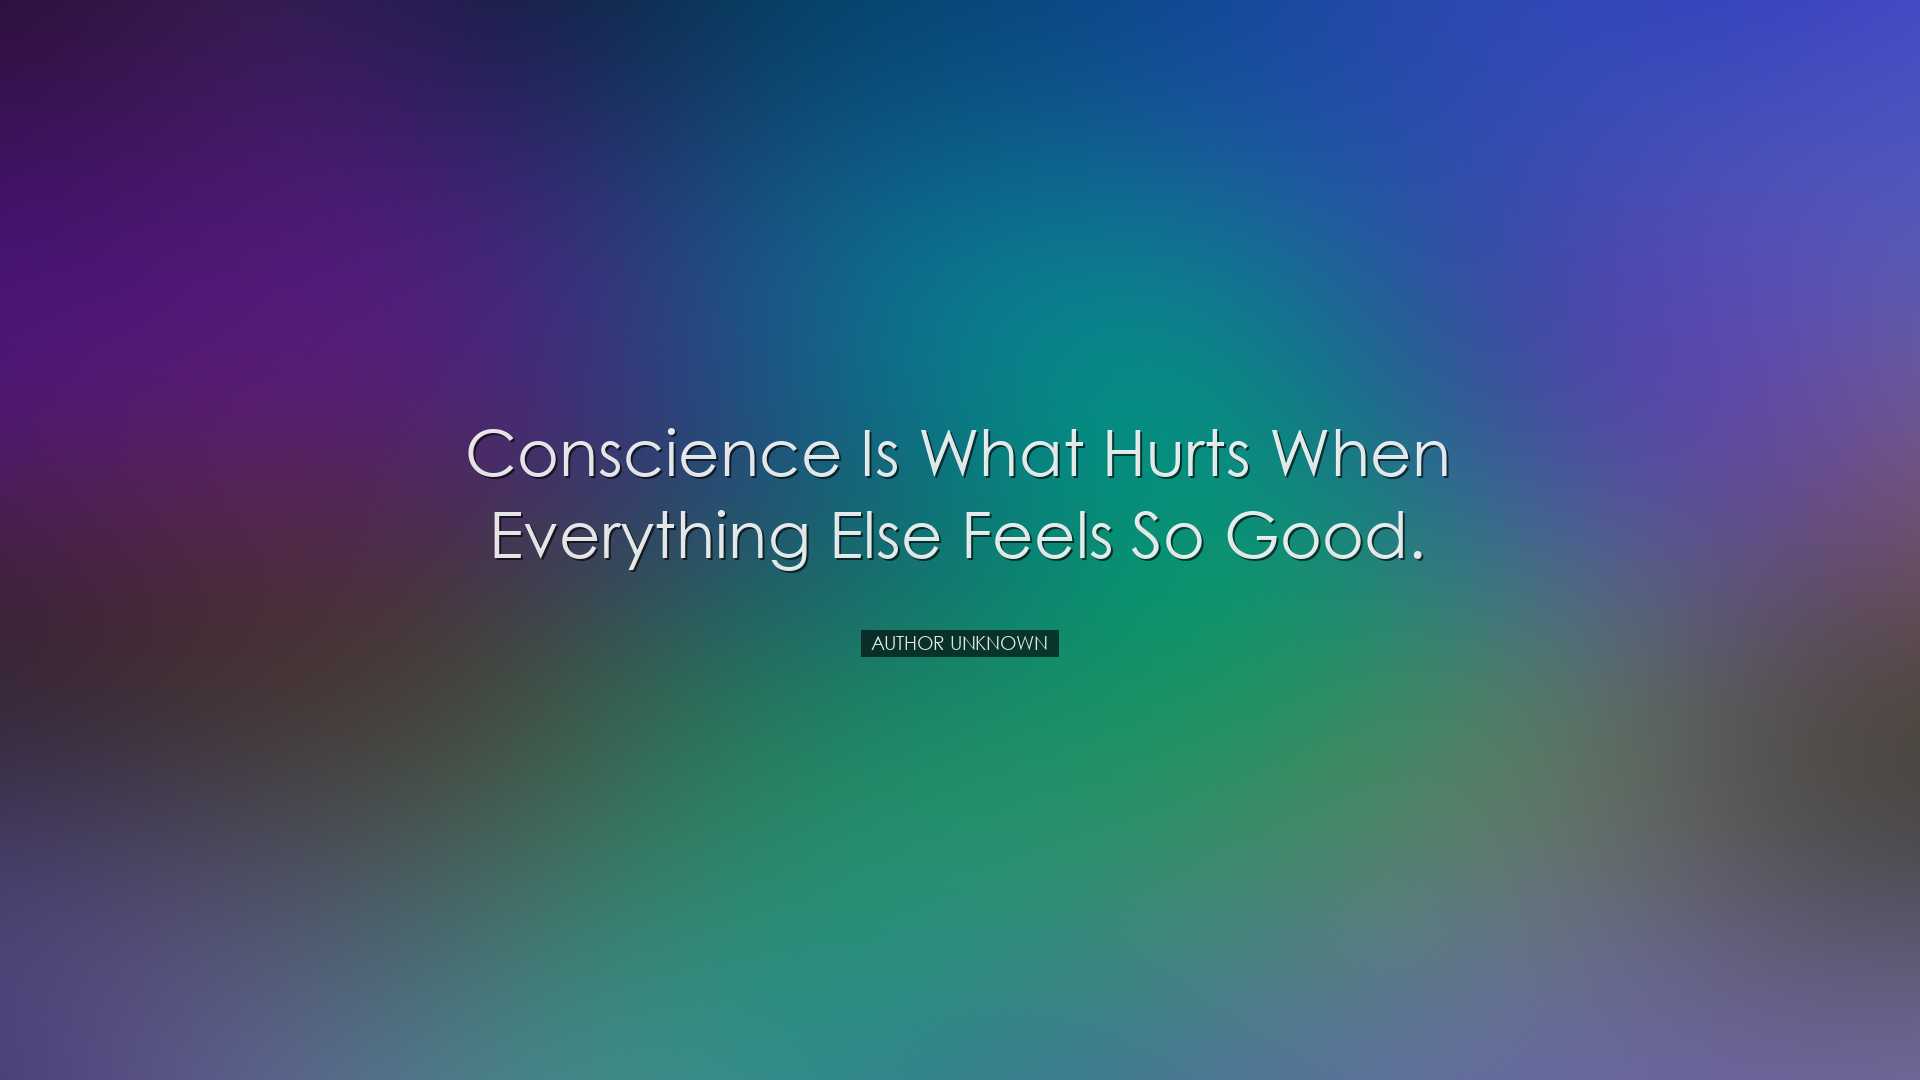 Conscience is what hurts when everything else feels so good. - Aut